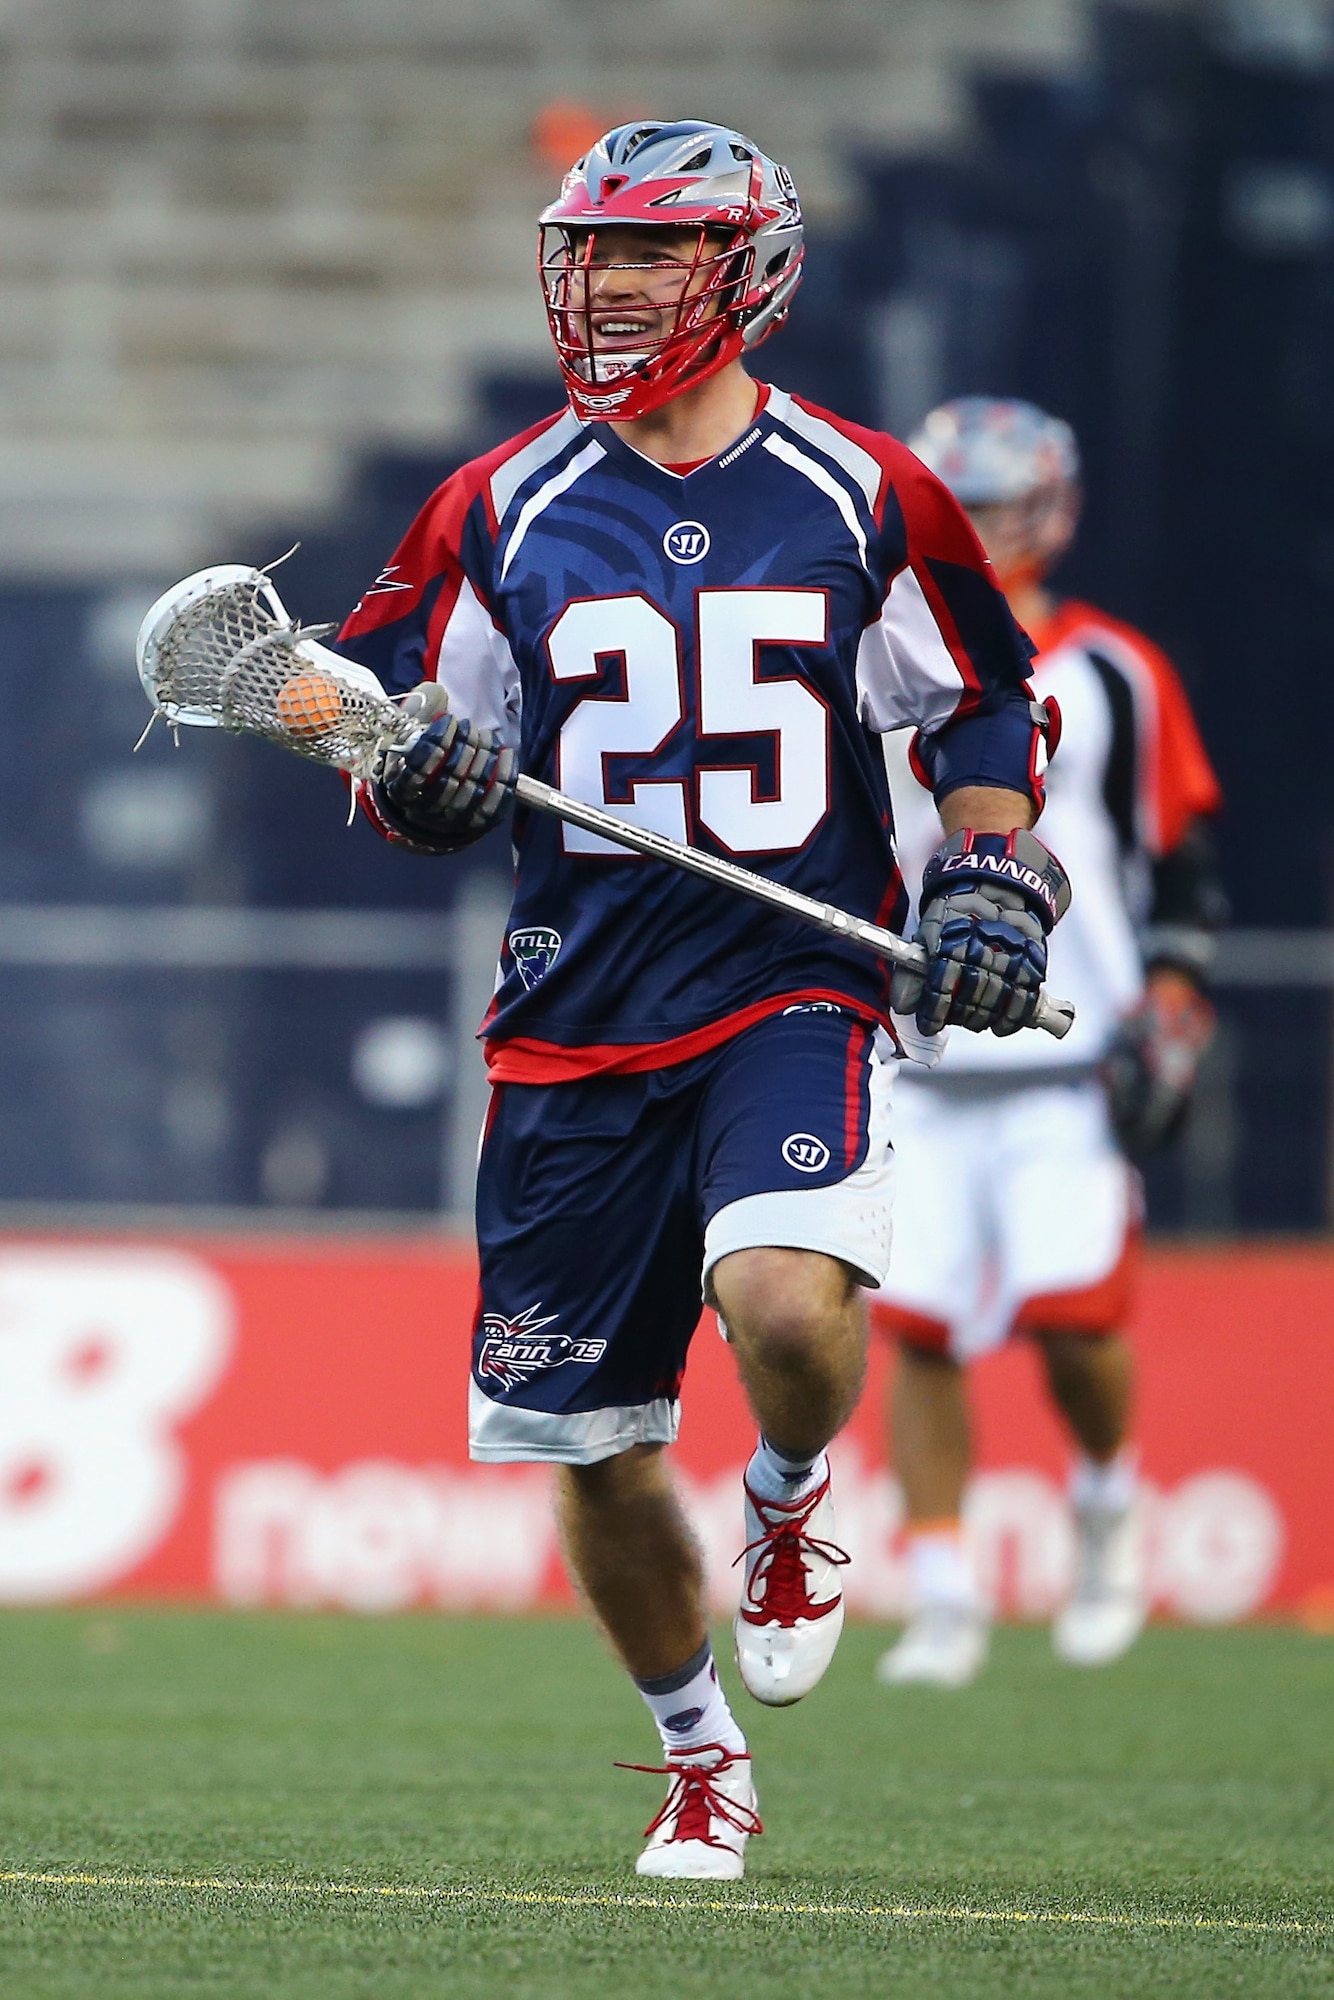 Erik Smith (25) cradles the ball during a break in the action against the Denver Outlaws game earlier this season at Gillette Stadium in Foxboro, Mass. The Boston Cannons, who drafted Smith with the 37th overall pick in last year's MLL draft, is a second lieutenant assigned to the C3I and Networks Directorate at Hanscom Air Force Base. (Courtesy photo)